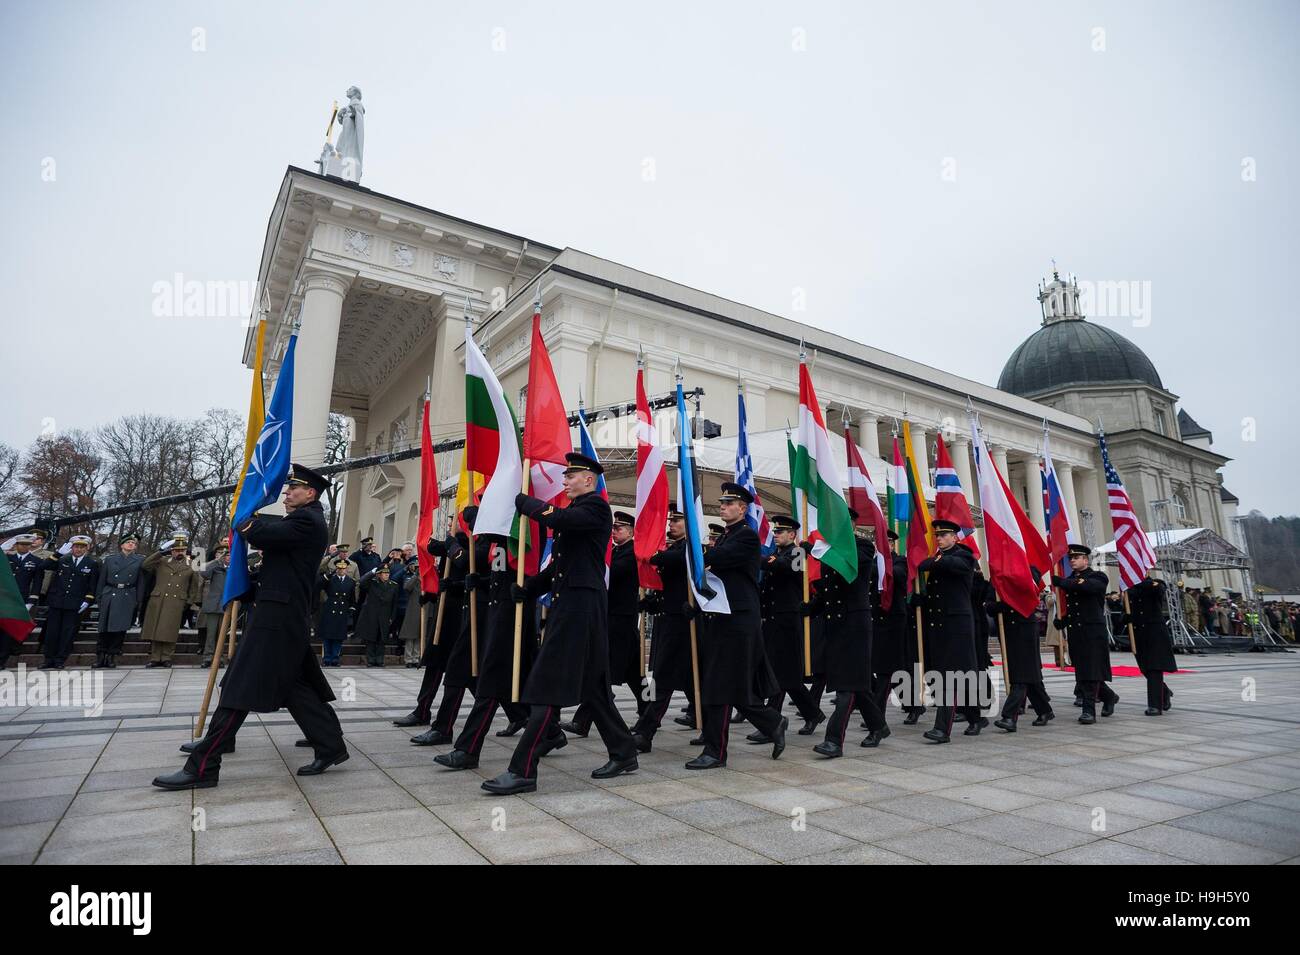 Vilnius, Lithuania. 23rd Nov, 2016. Guards of honor attend the Lithuania's Armed Forces Day celebration in Vilnius, capital of Lithuania, on Nov. 23, 2016. Lithuanian armed forces and troops of some NATO member countries held a gala with formation on Wednesday to celebrate Lithuania's Armed Forces Day. The first decree on establishing armed forces was appoved on Nov. 23, 1918, which became the Armed Forces Day of the Baltic country. © Alfredas Pliadis/Xinhua/Alamy Live News Stock Photo